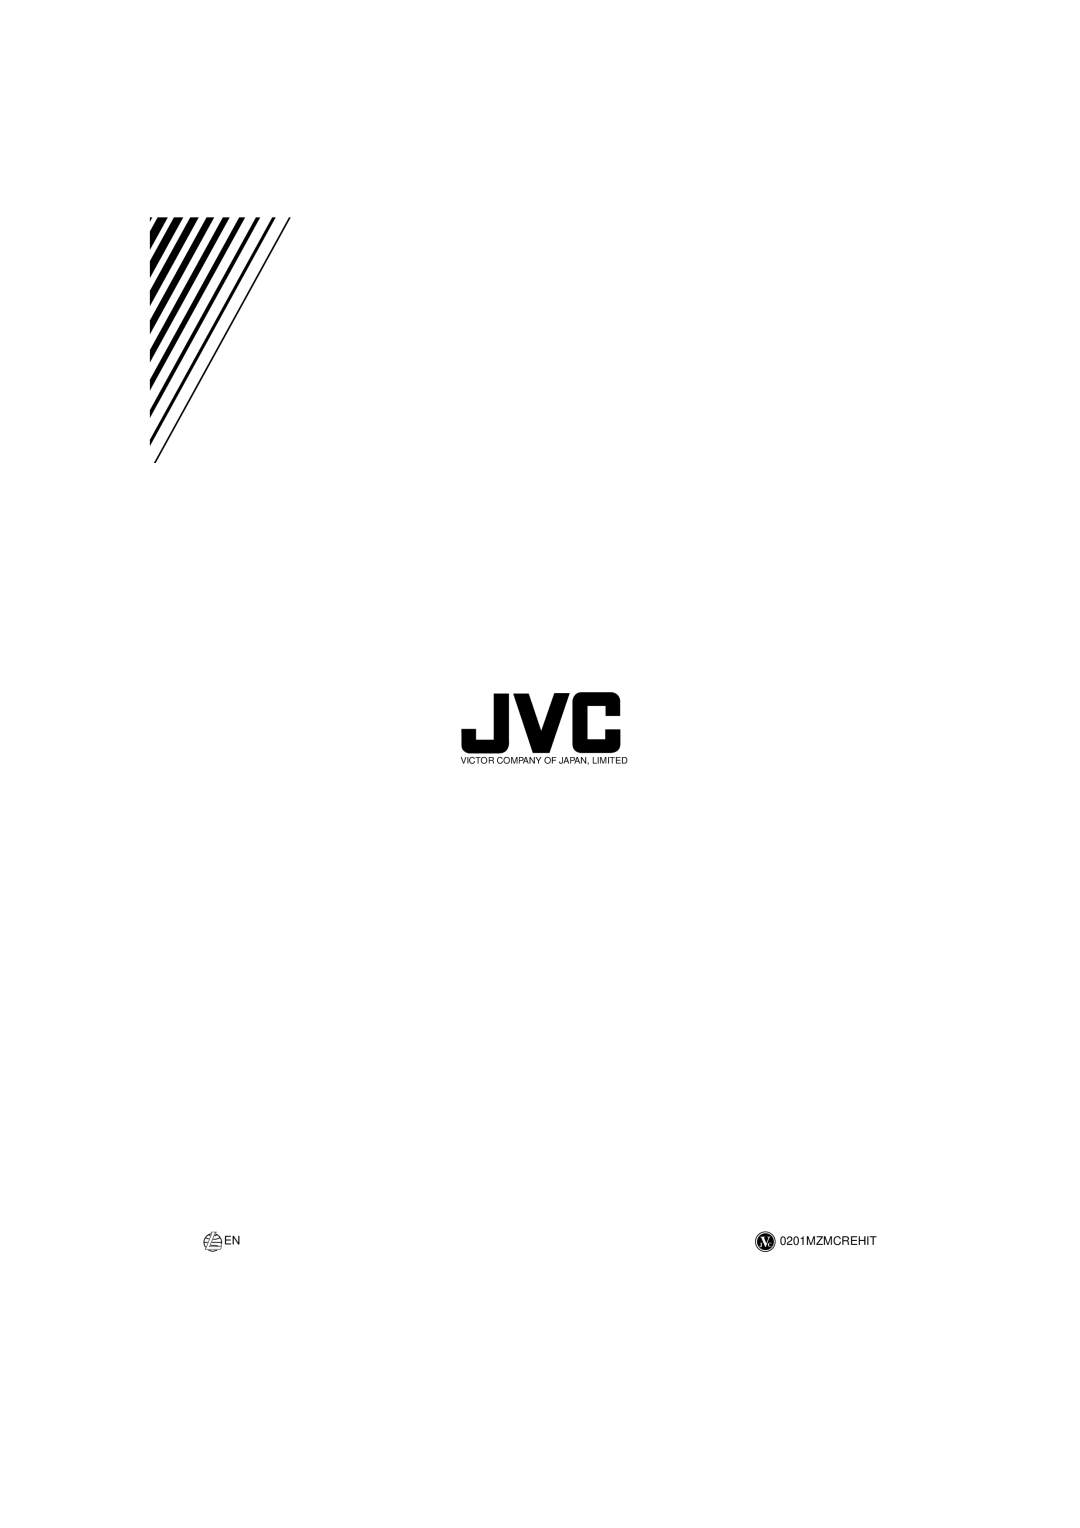 JVC FS-SD550, FS-SD990 manual 0201MZMCREHIT, Victor Company Of Japan, Limited 